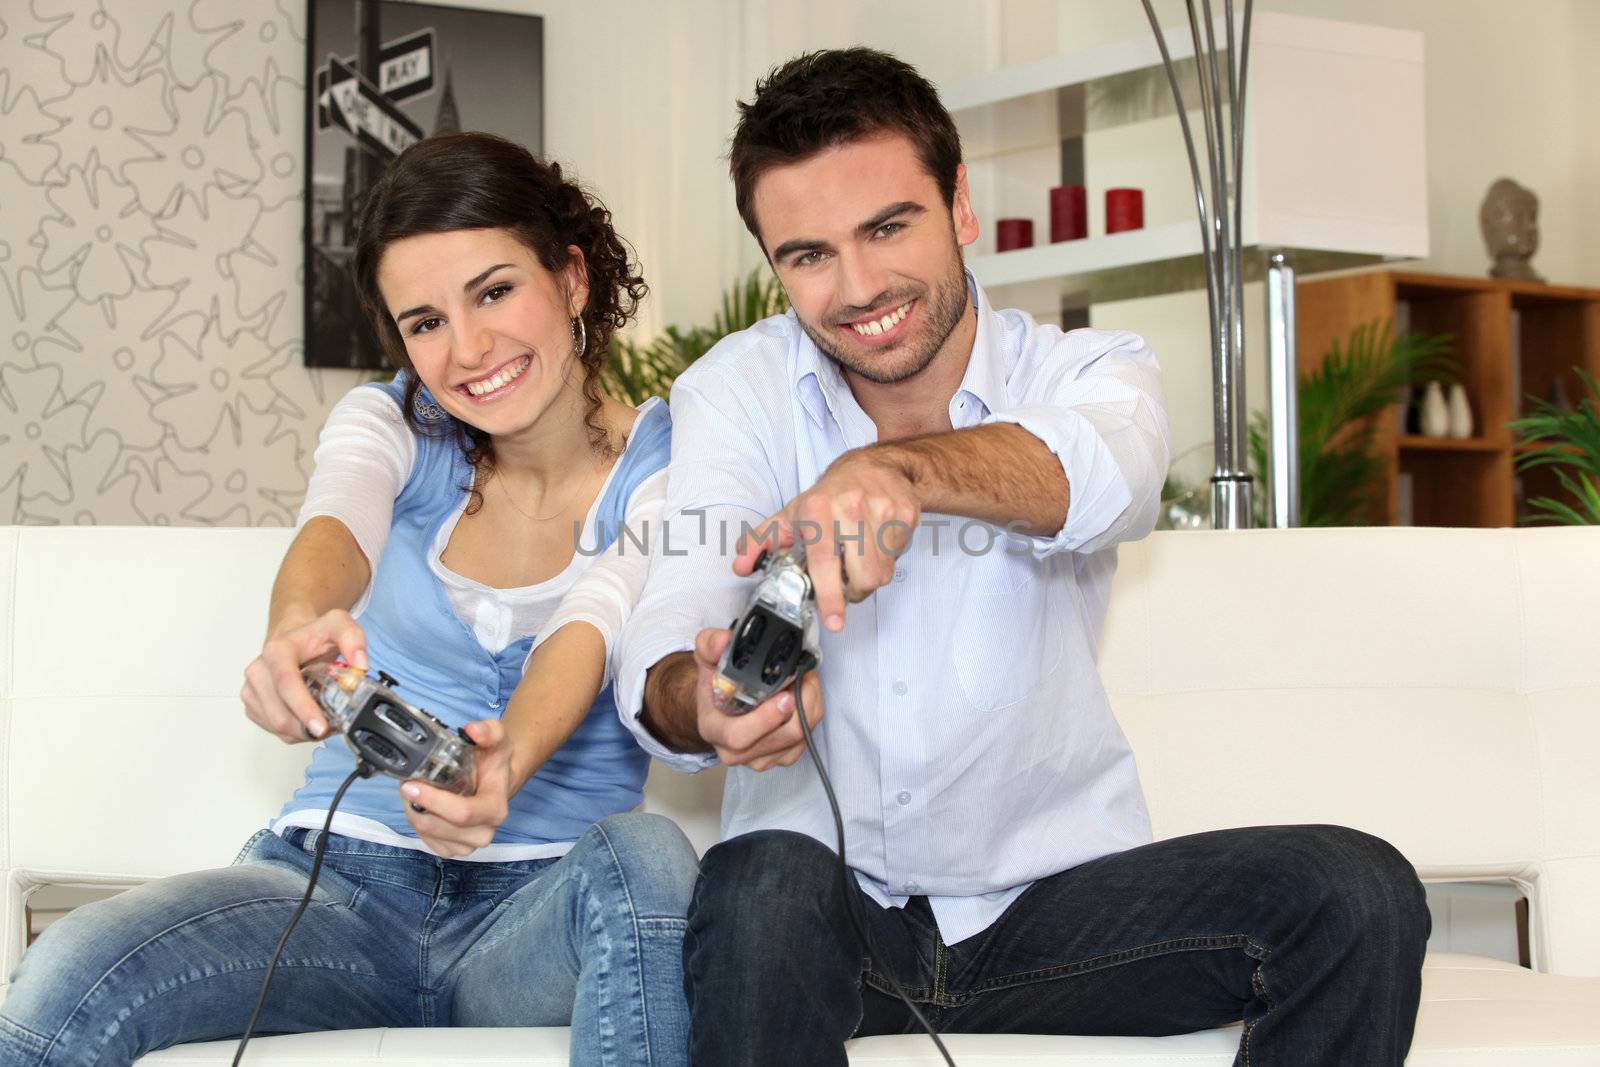 A couple having fun playing video games